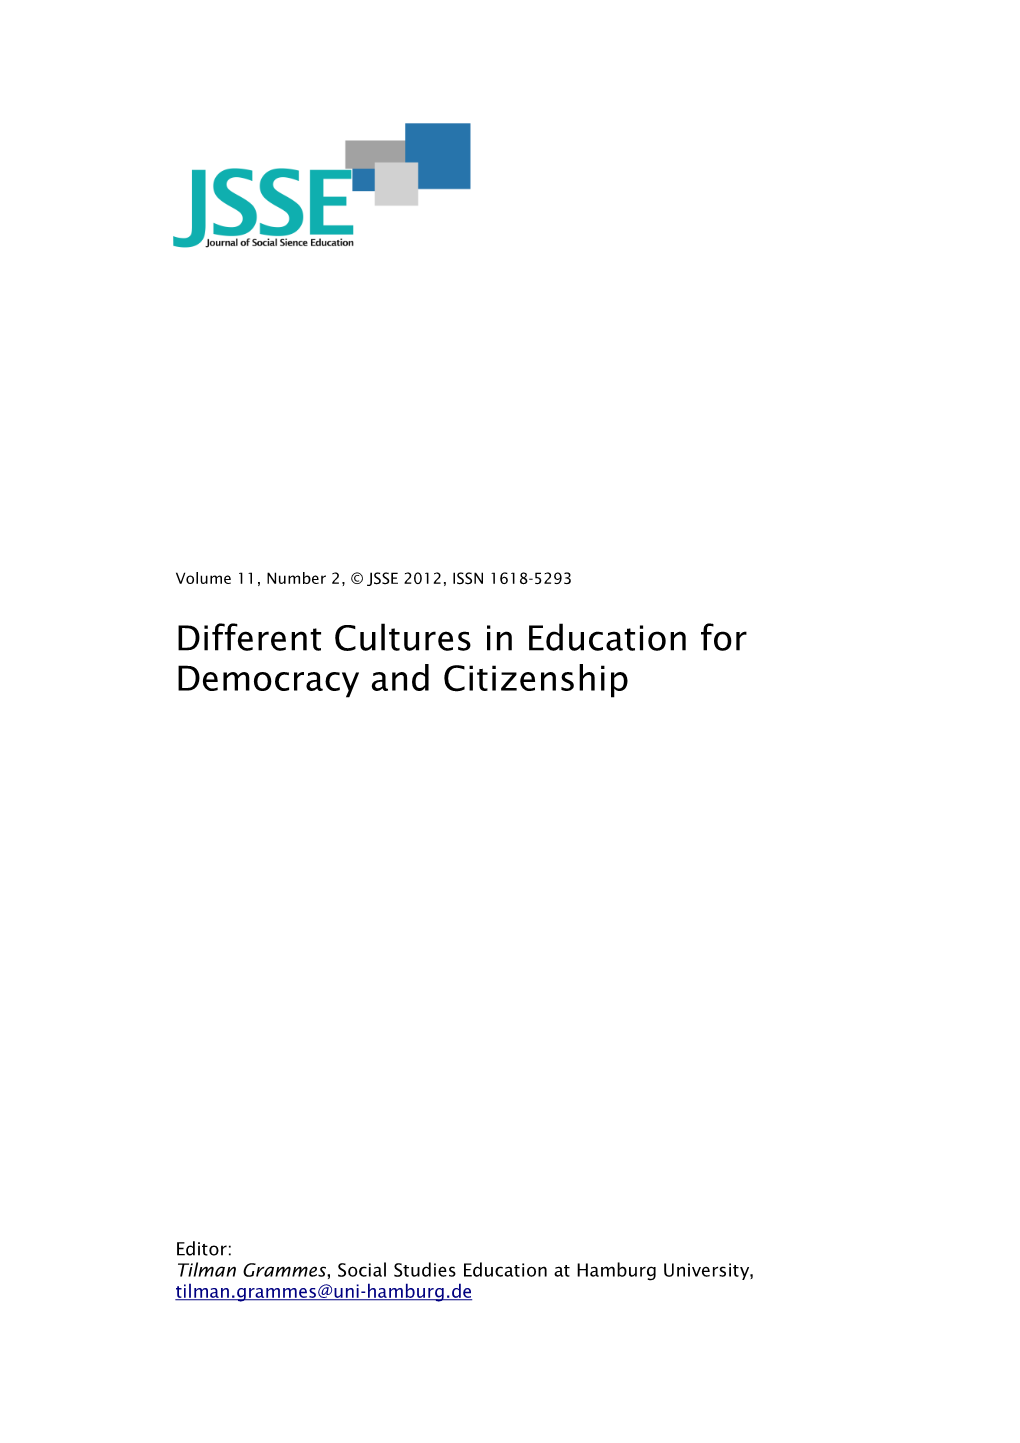 Different Cultures in Education for Democracy and Citizenship